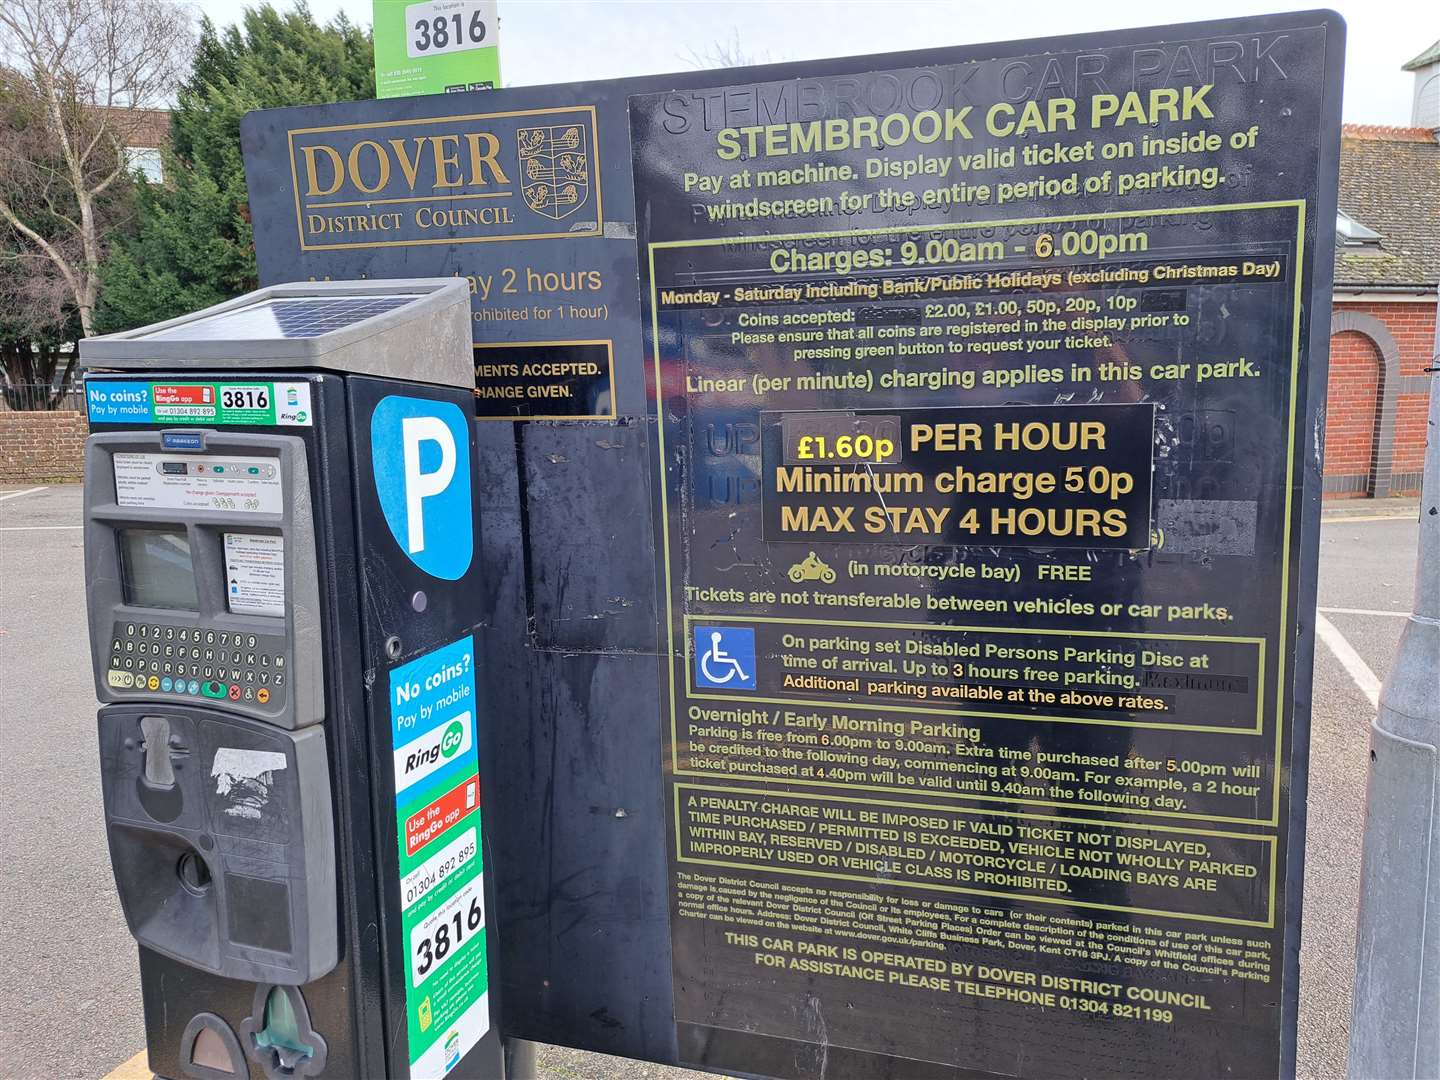 Most parking fees in the Dover district would not go up under the proposals